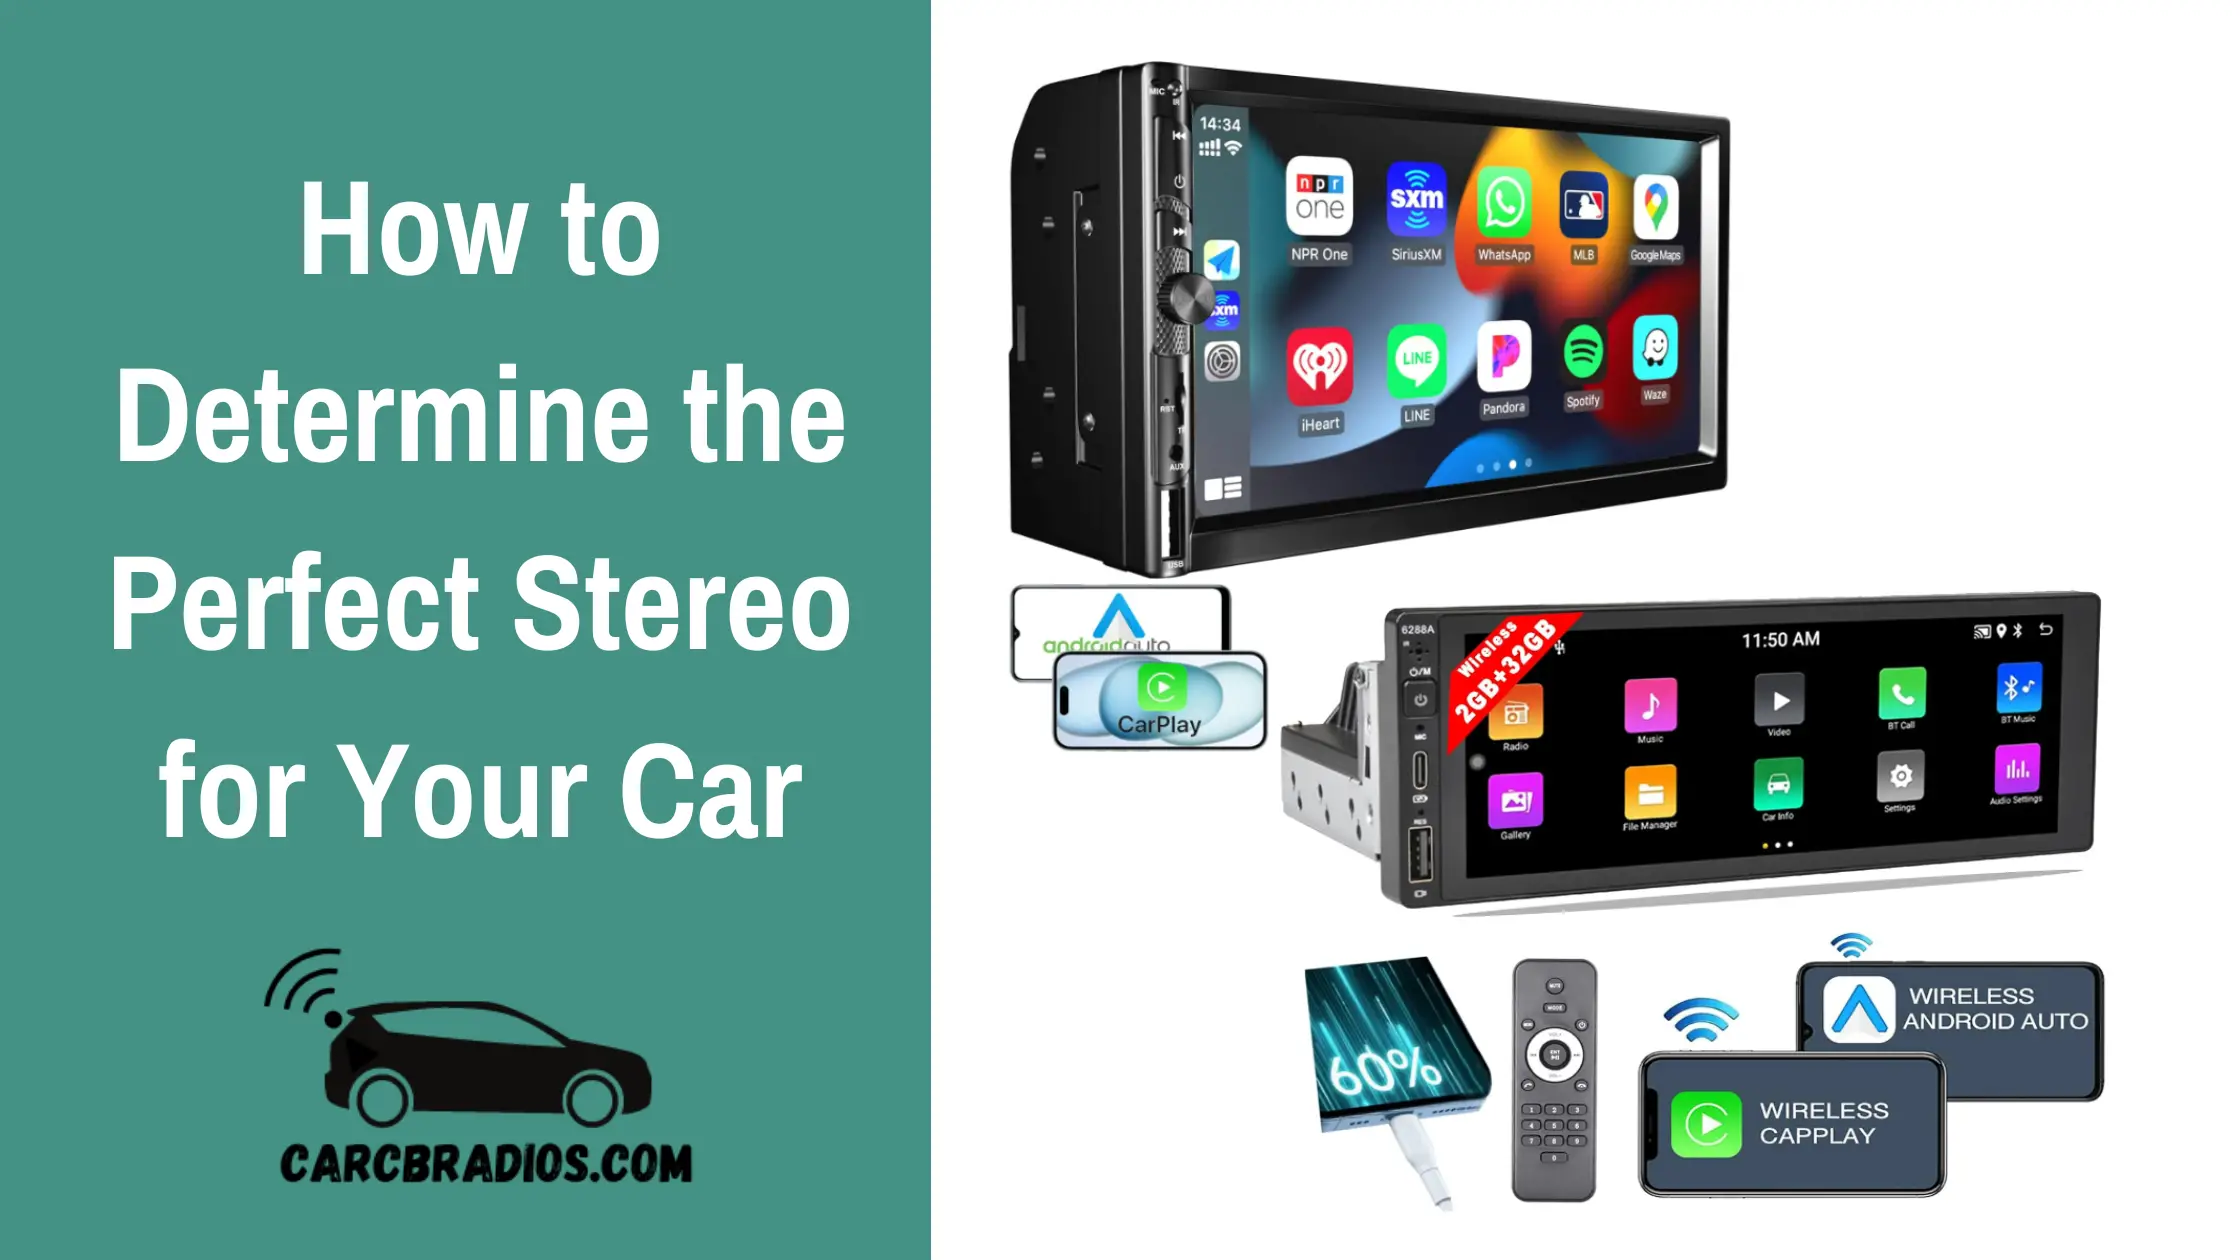 In summary, the main difference between Single-DIN and Double-DIN car stereos is the size of the stereo slot. Single-DIN is the standard size and is more common in most vehicles, while Double-DIN is used in modern or luxury vehicles and provides extra space for various features